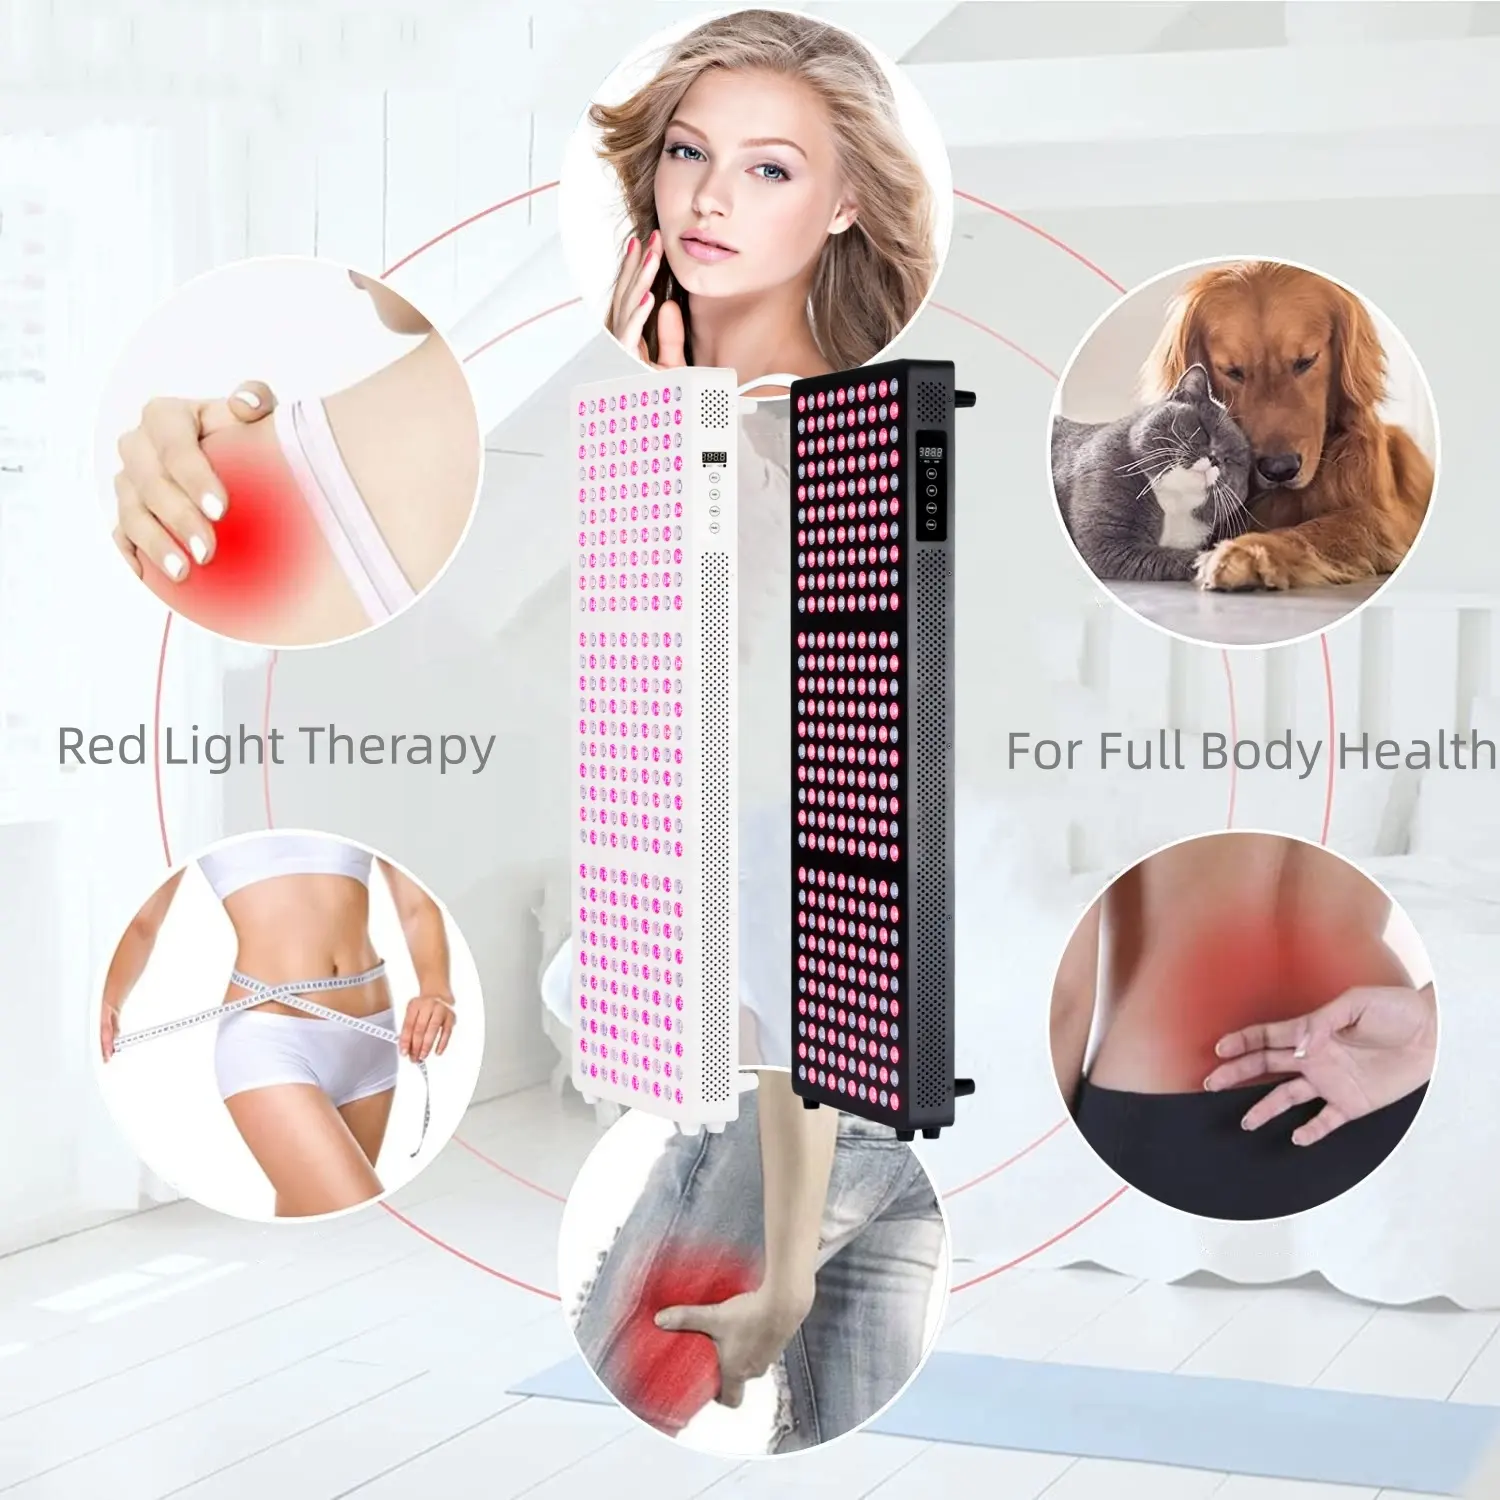 Pdt Led Light Therapy OEM/ODM 7Wavelengths Salon Sauna Use Full Body Face Beauty Skin Care Infrared Device PDT Machine Led Red Light Therapy Panel